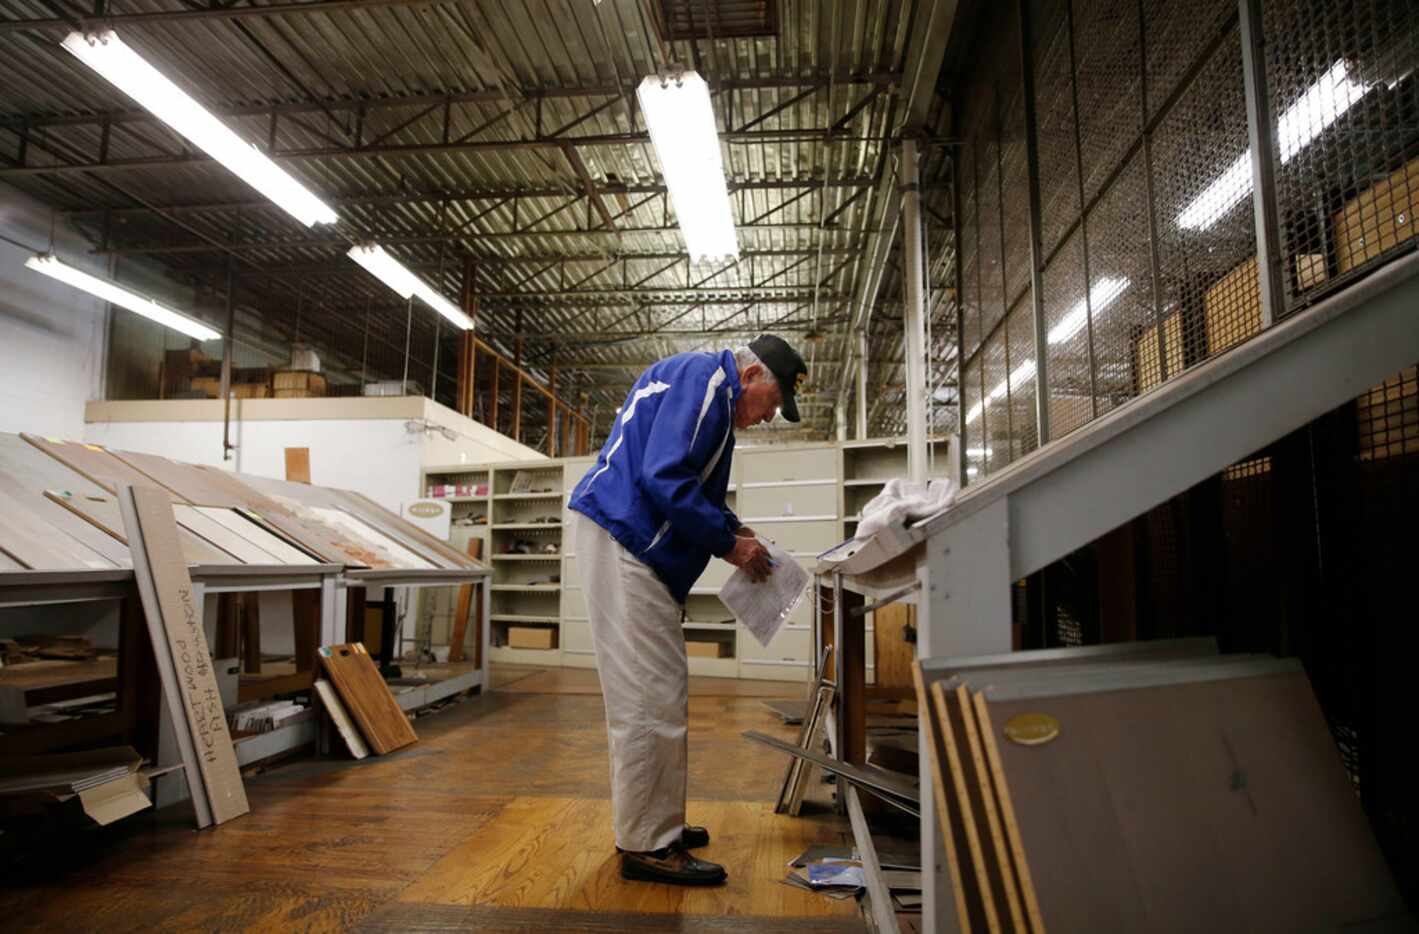 Chester Hollingsworth works on inventory at S&H Distributing in Dallas.